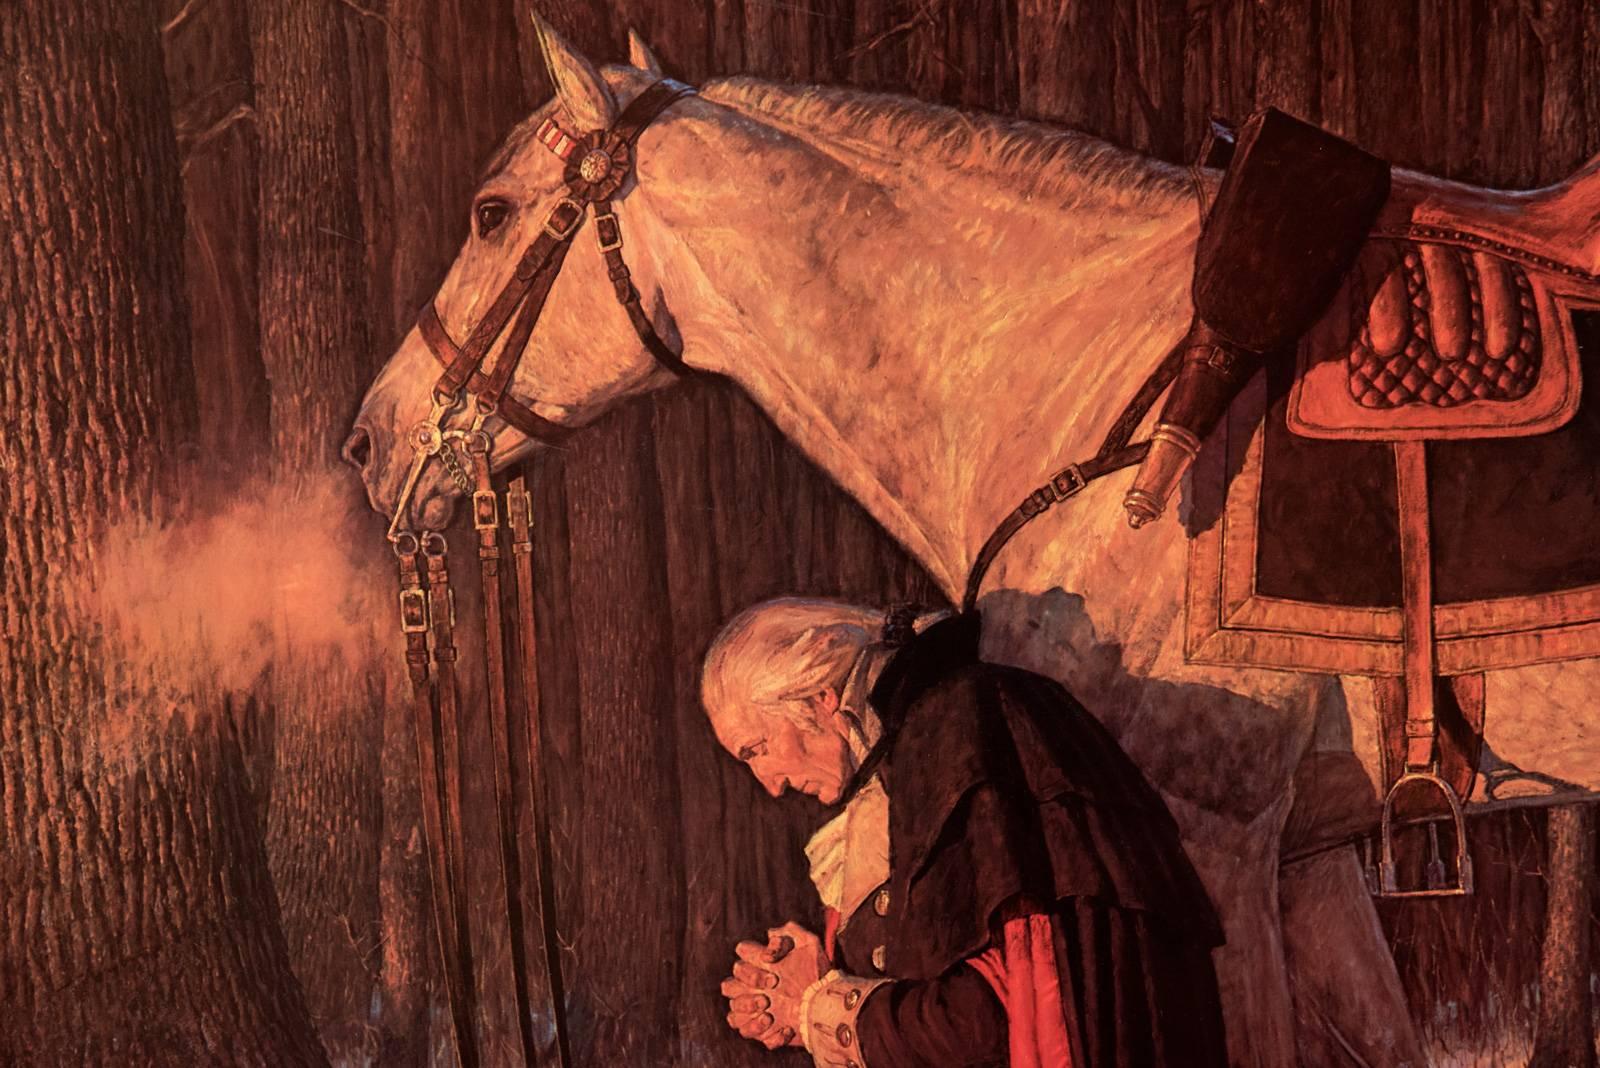 American Prayer at Valley Forge by Arnold Friberg Dedicated to Richard Nixon